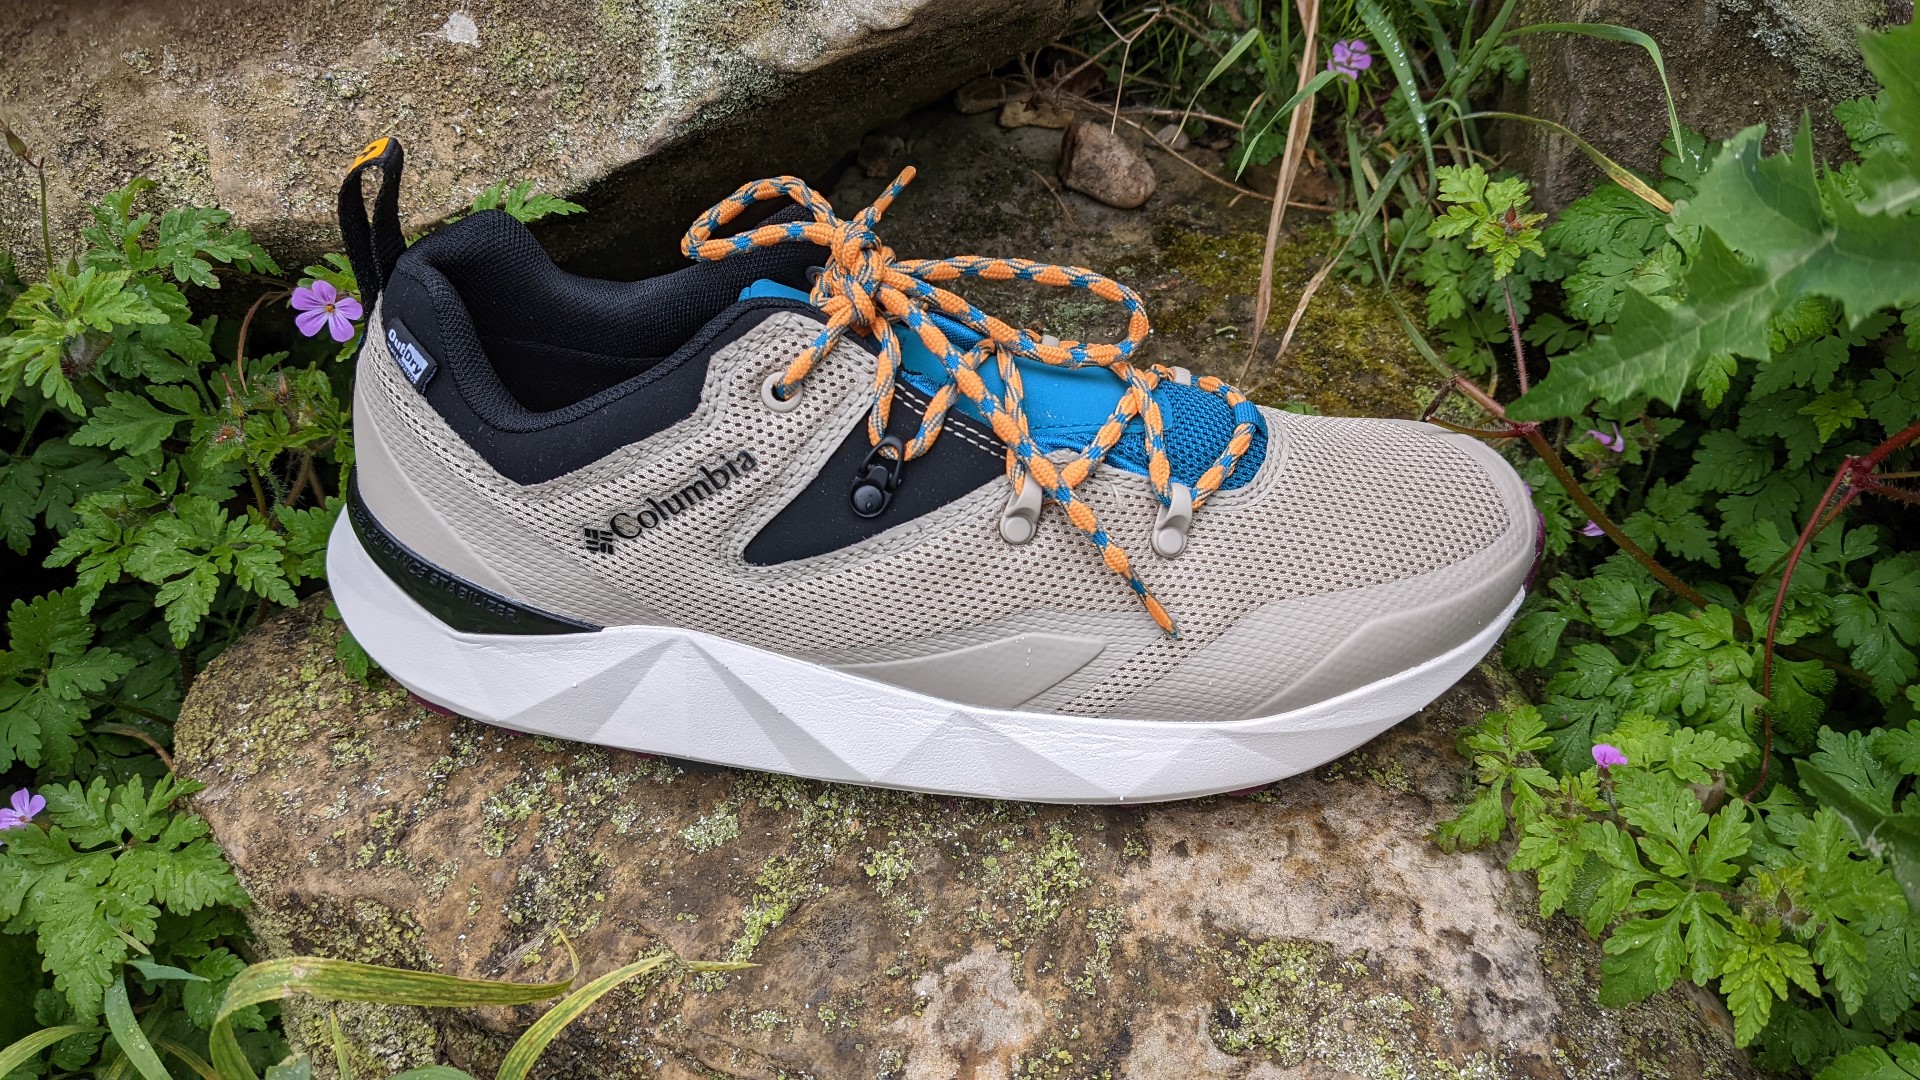 Columbia Facet 60 Low Outdry Hiking Shoe review | T3